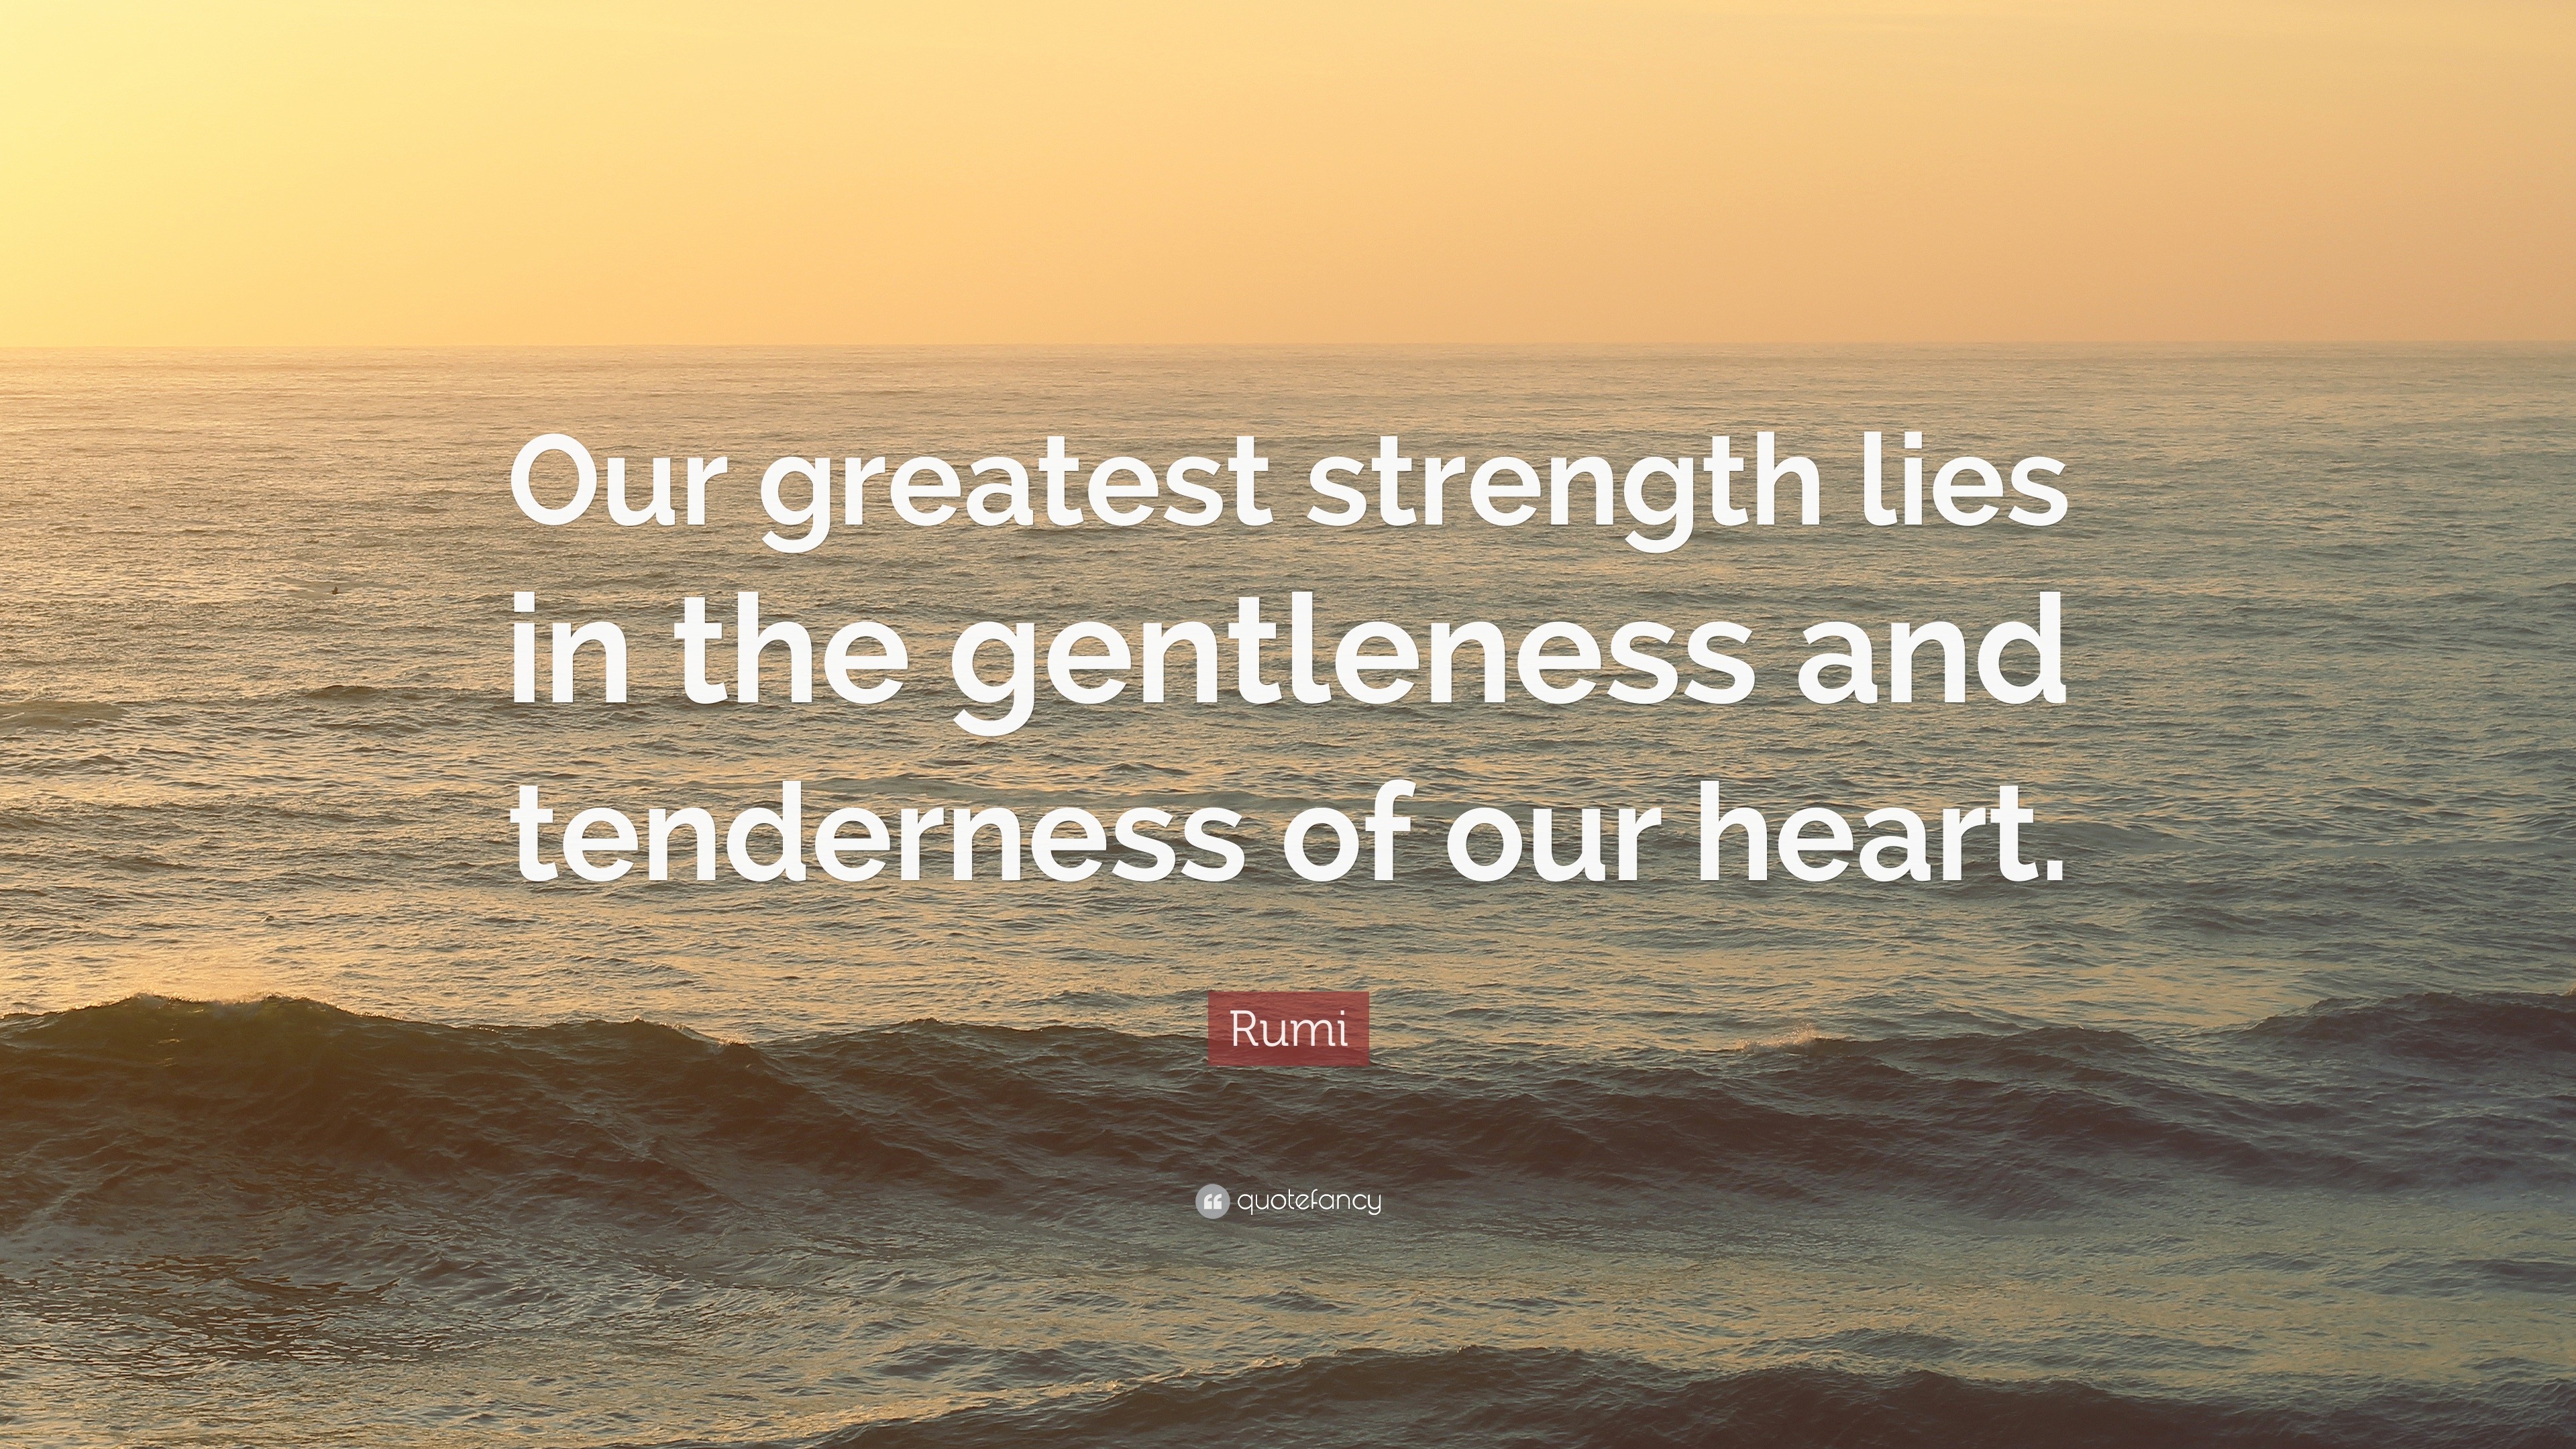 Rumi Quote: “Our greatest strength lies in the gentleness and